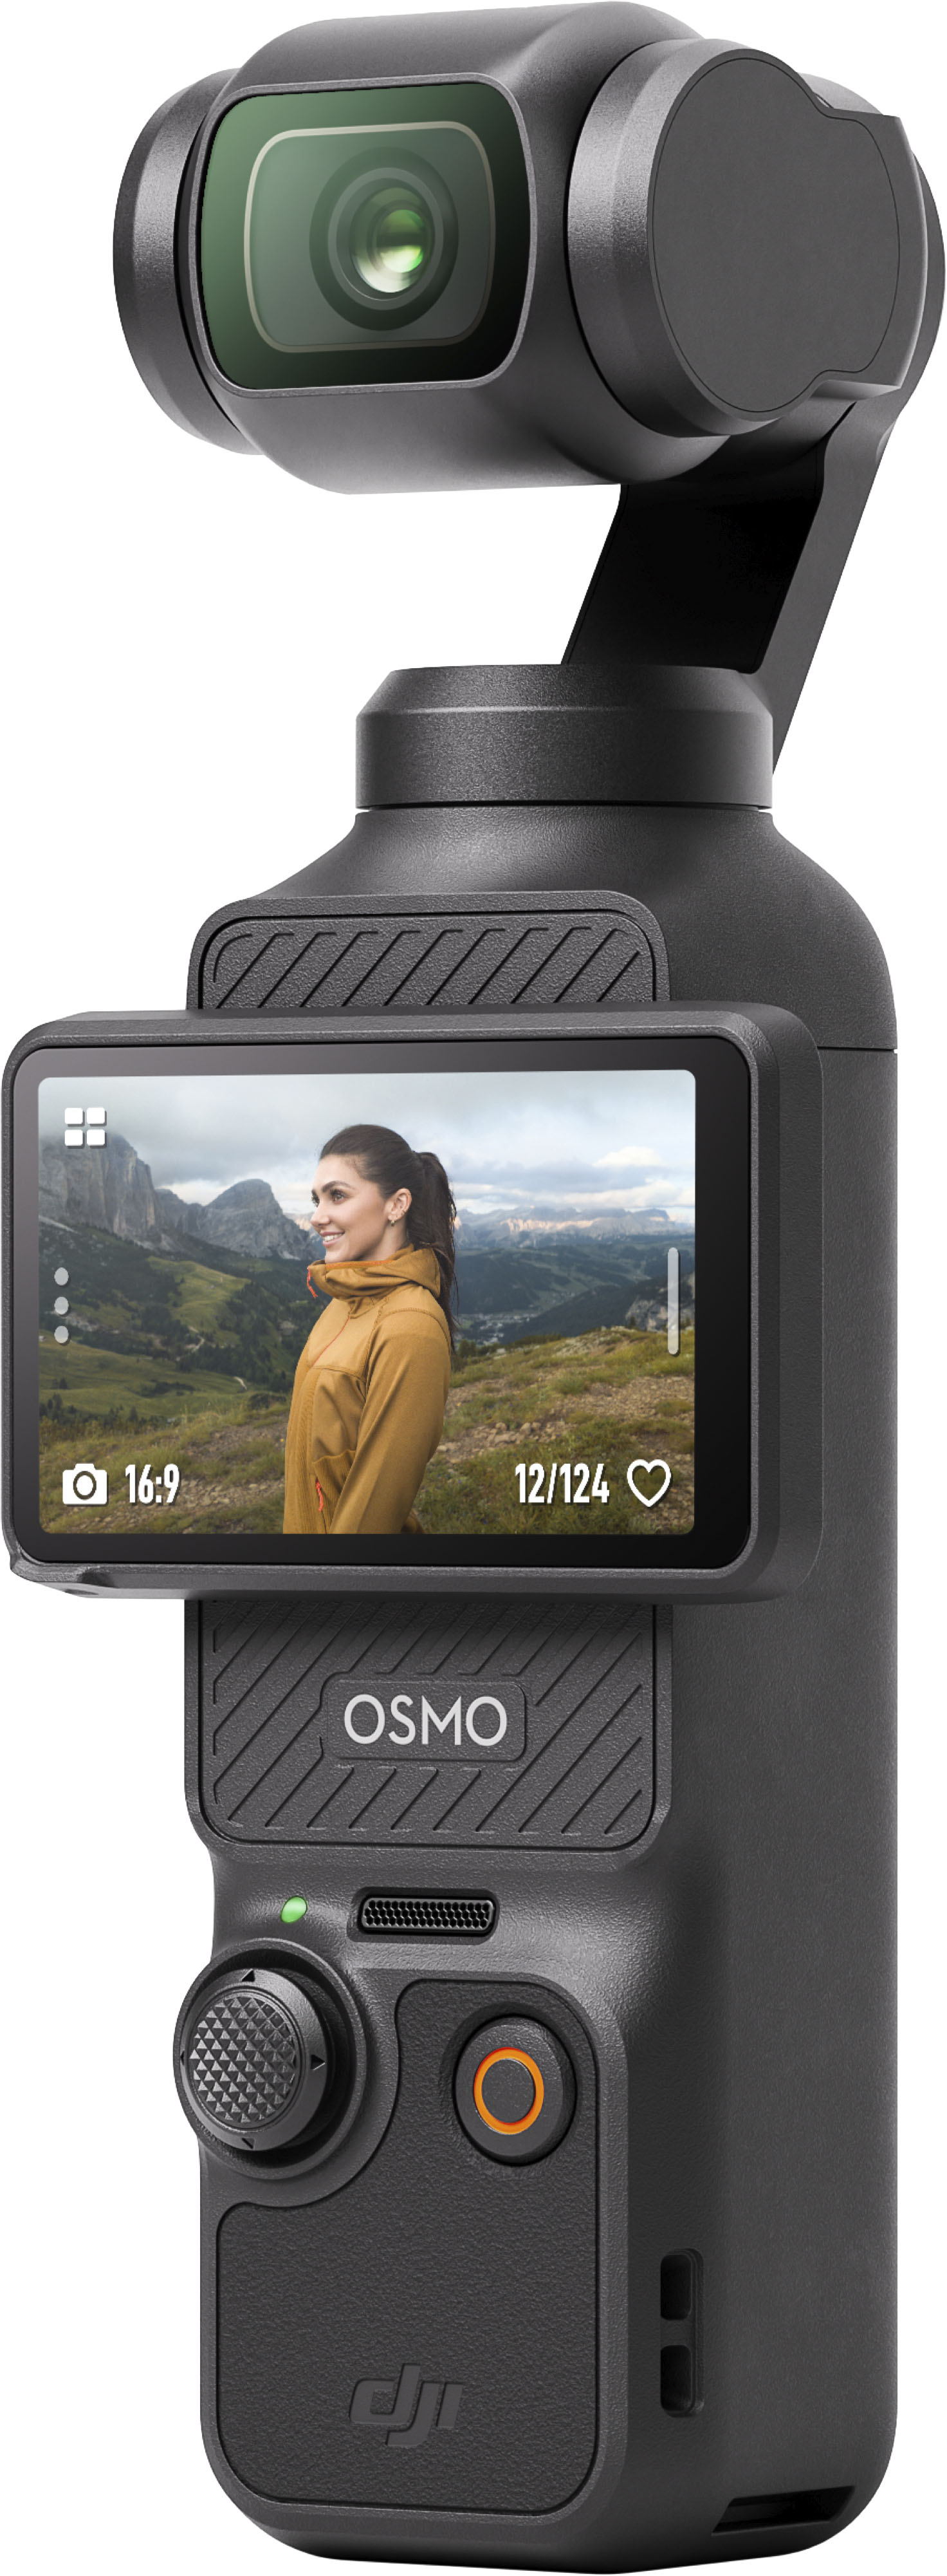 DJI Osmo Pocket 3 4K 120fps Handheld 3-Axis Gimbal Stabilizer -  CP.OS.00000301.01 